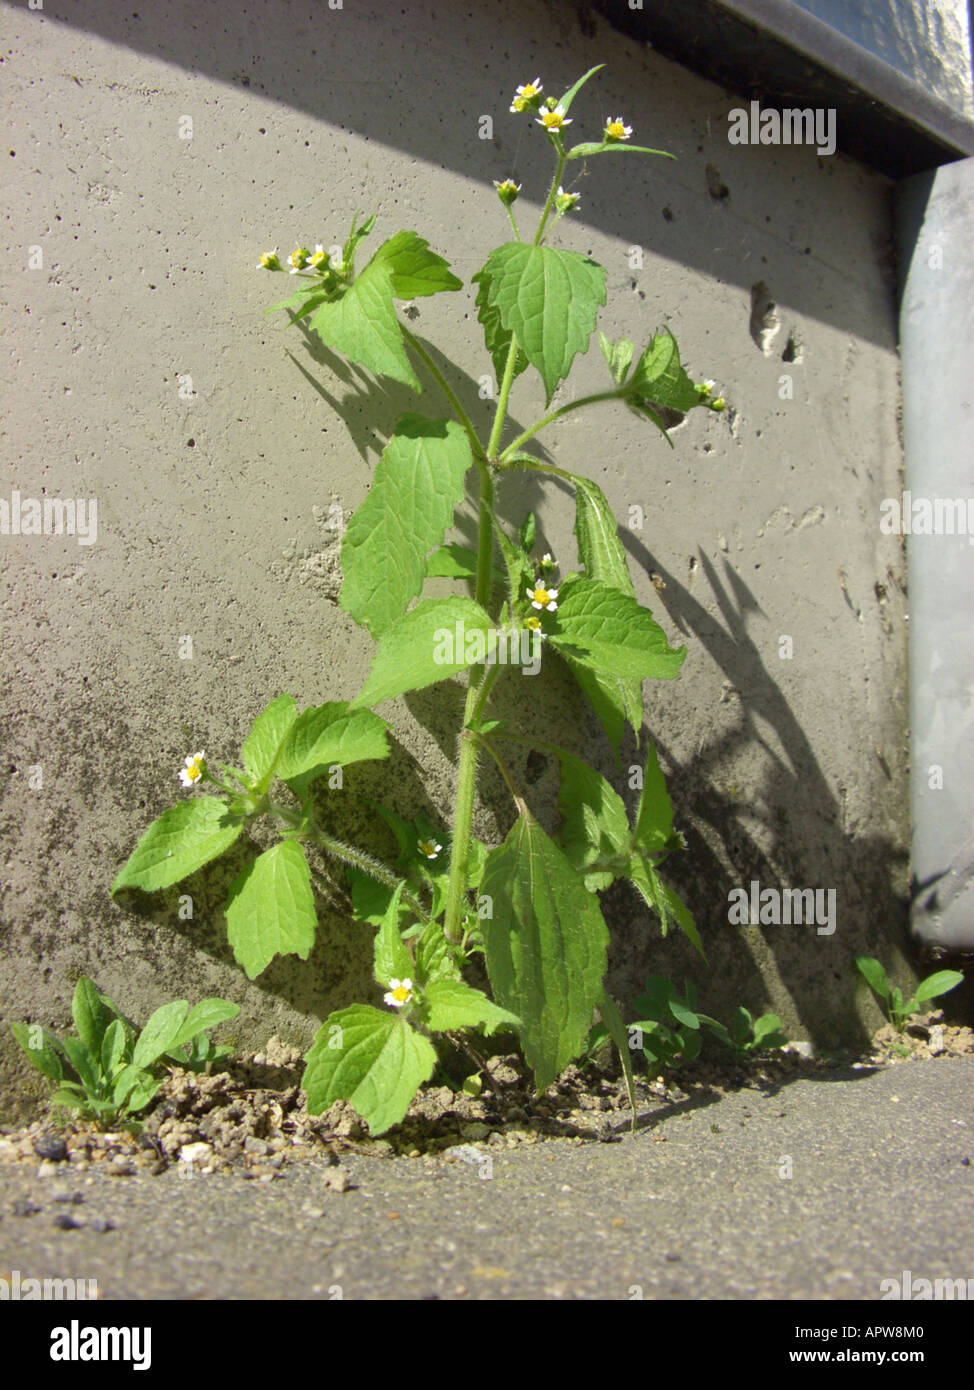 shaggy soldier, hairy galinsoga (Galinsoga ciliata), plant on a sidewalk at a building Stock Photo